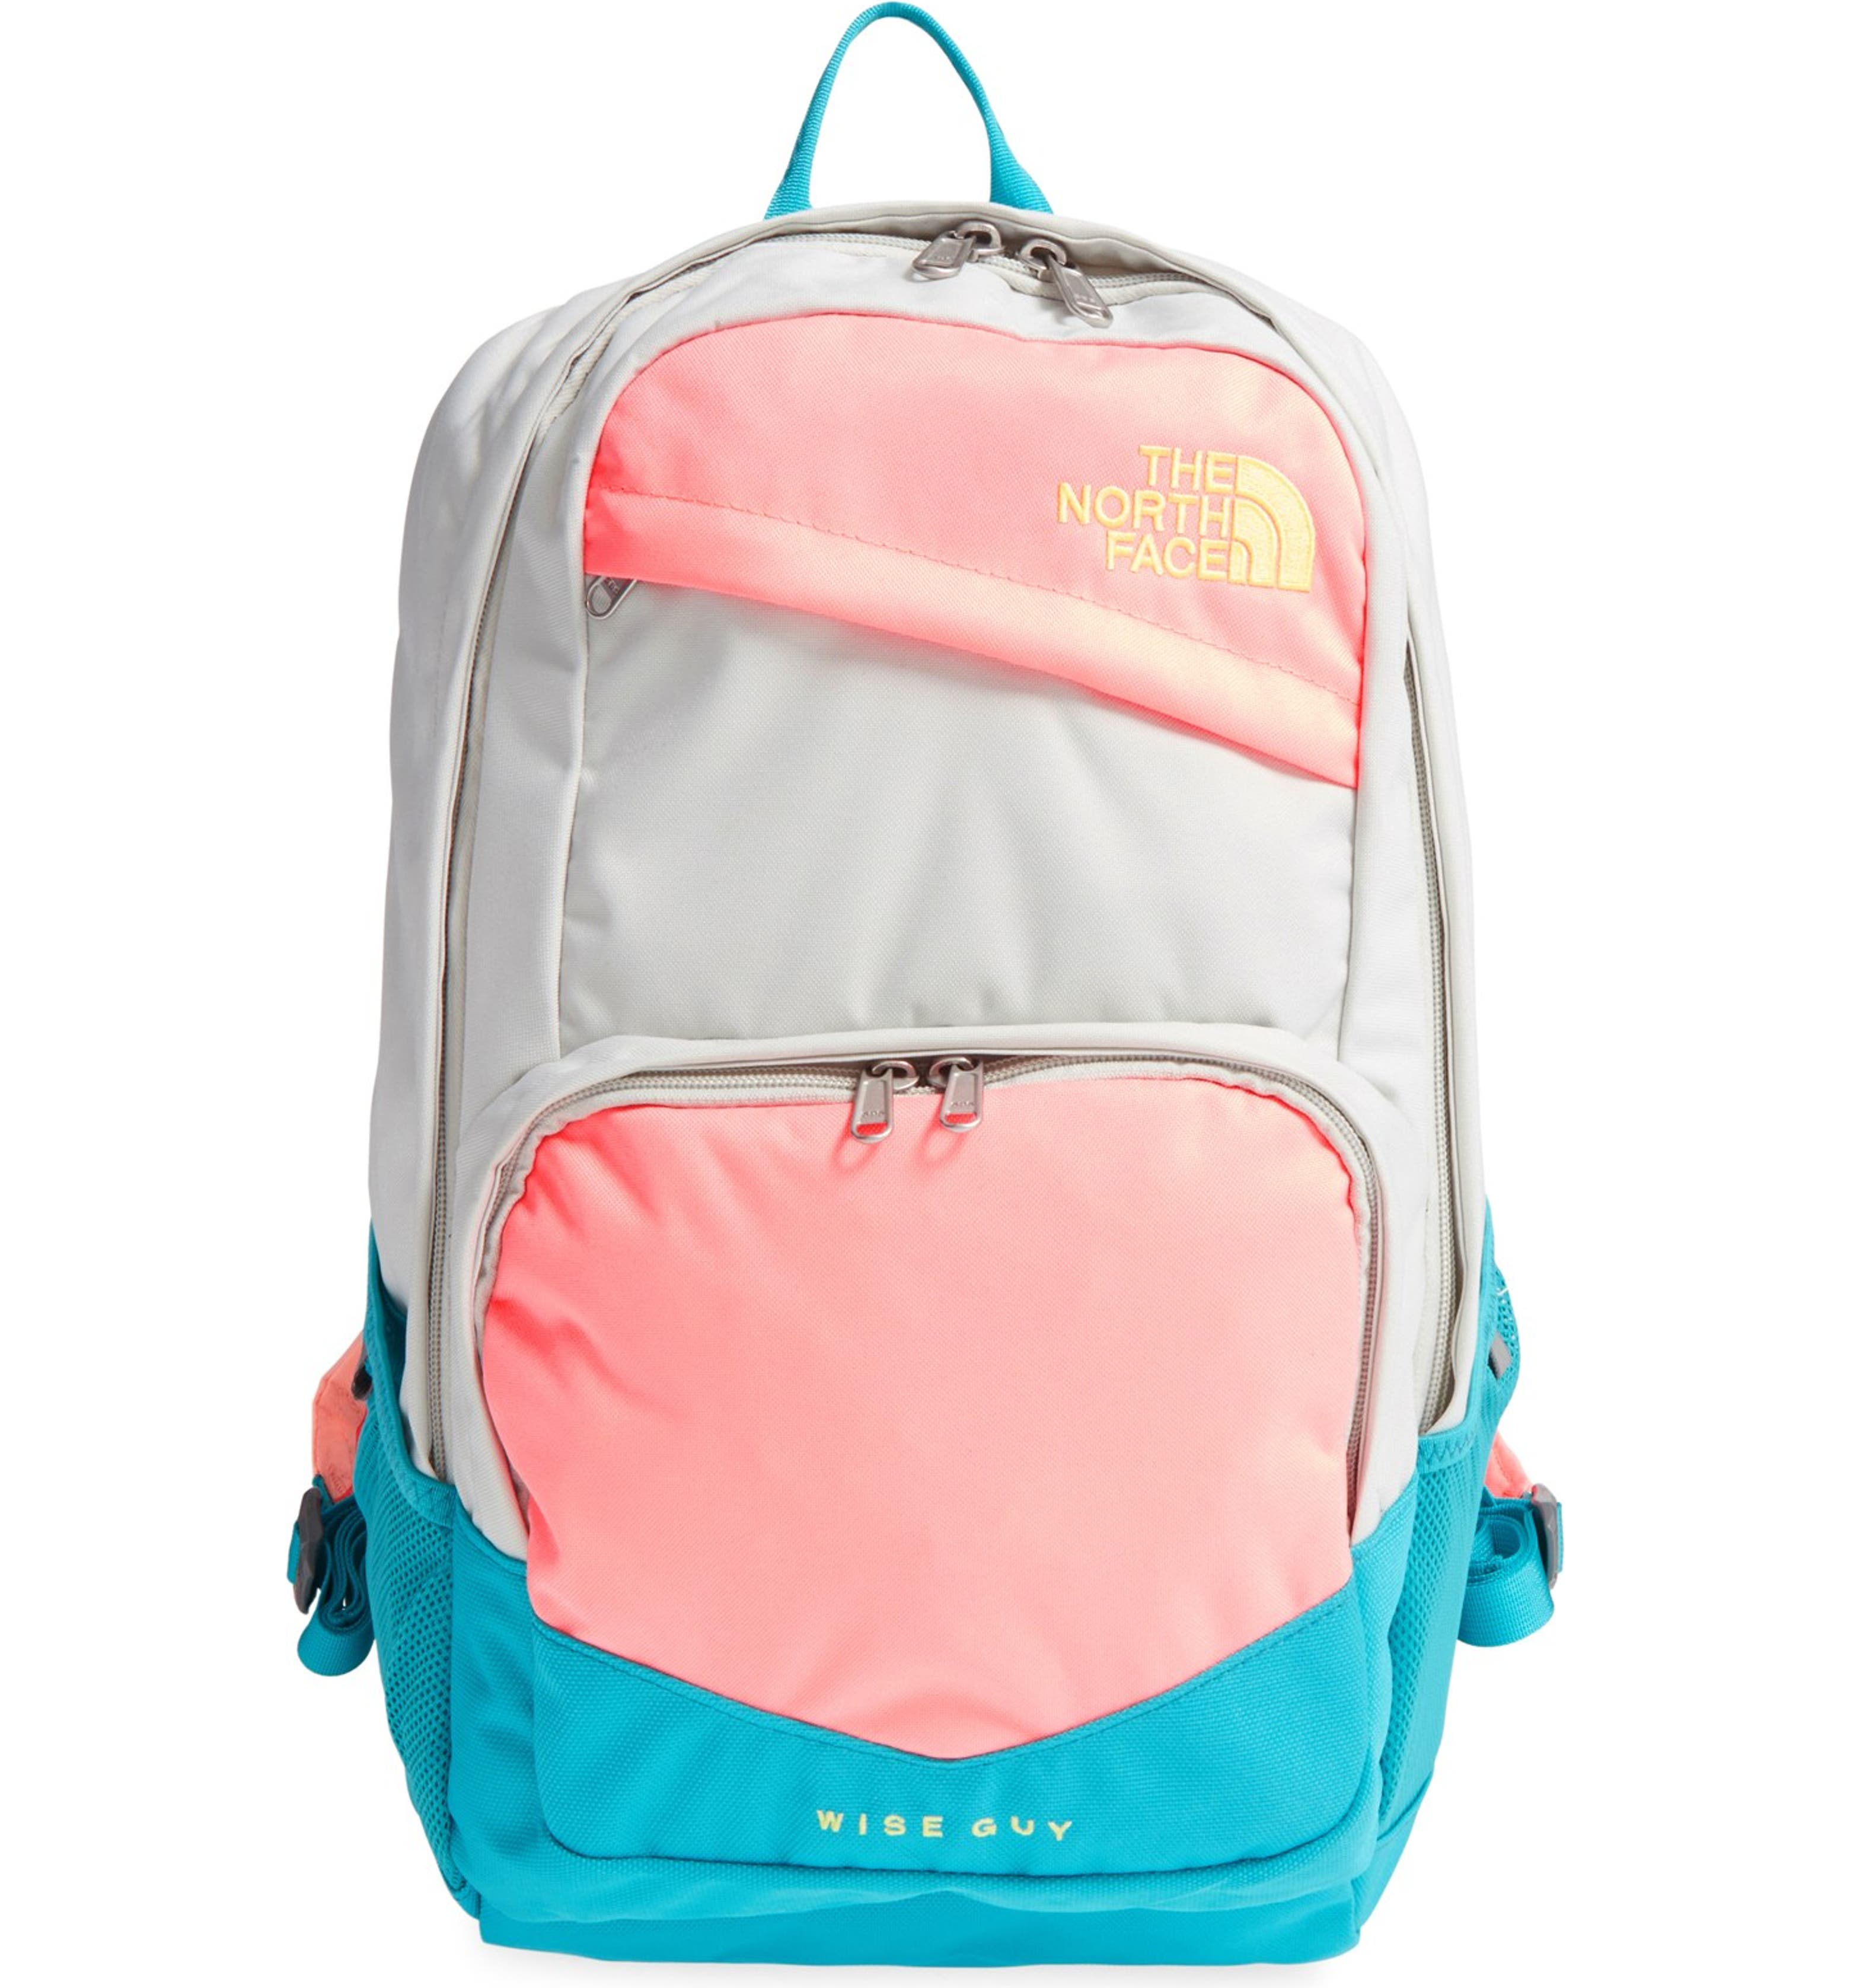 The North Face 'Wise Guy' Backpack | Nordstrom